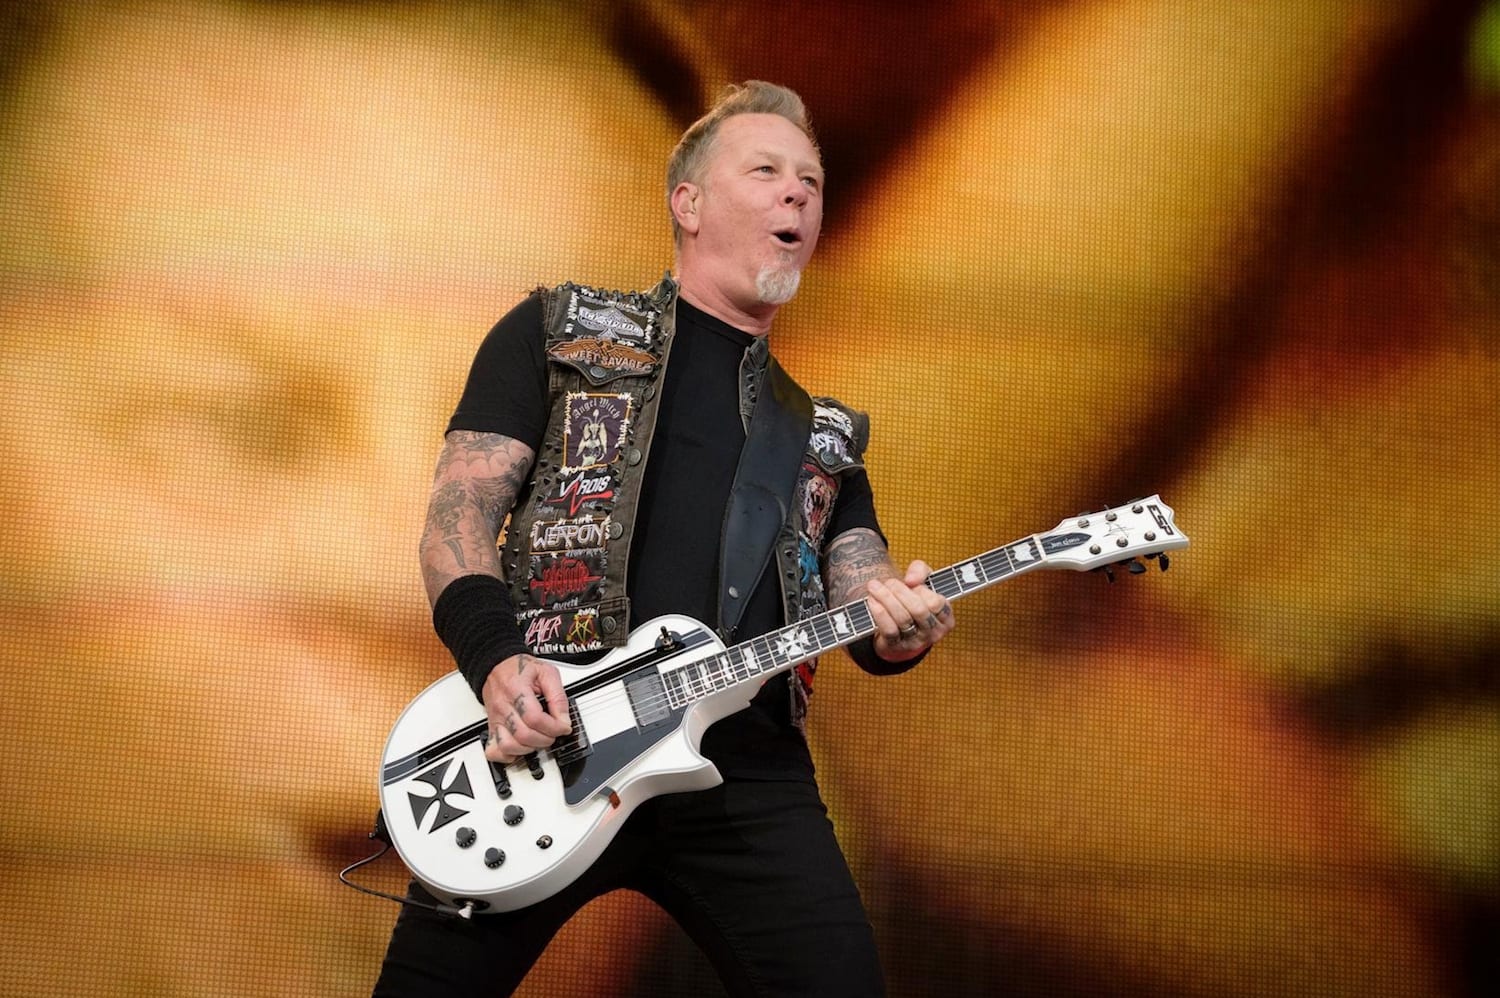 20 Best Metallica Songs of All Time